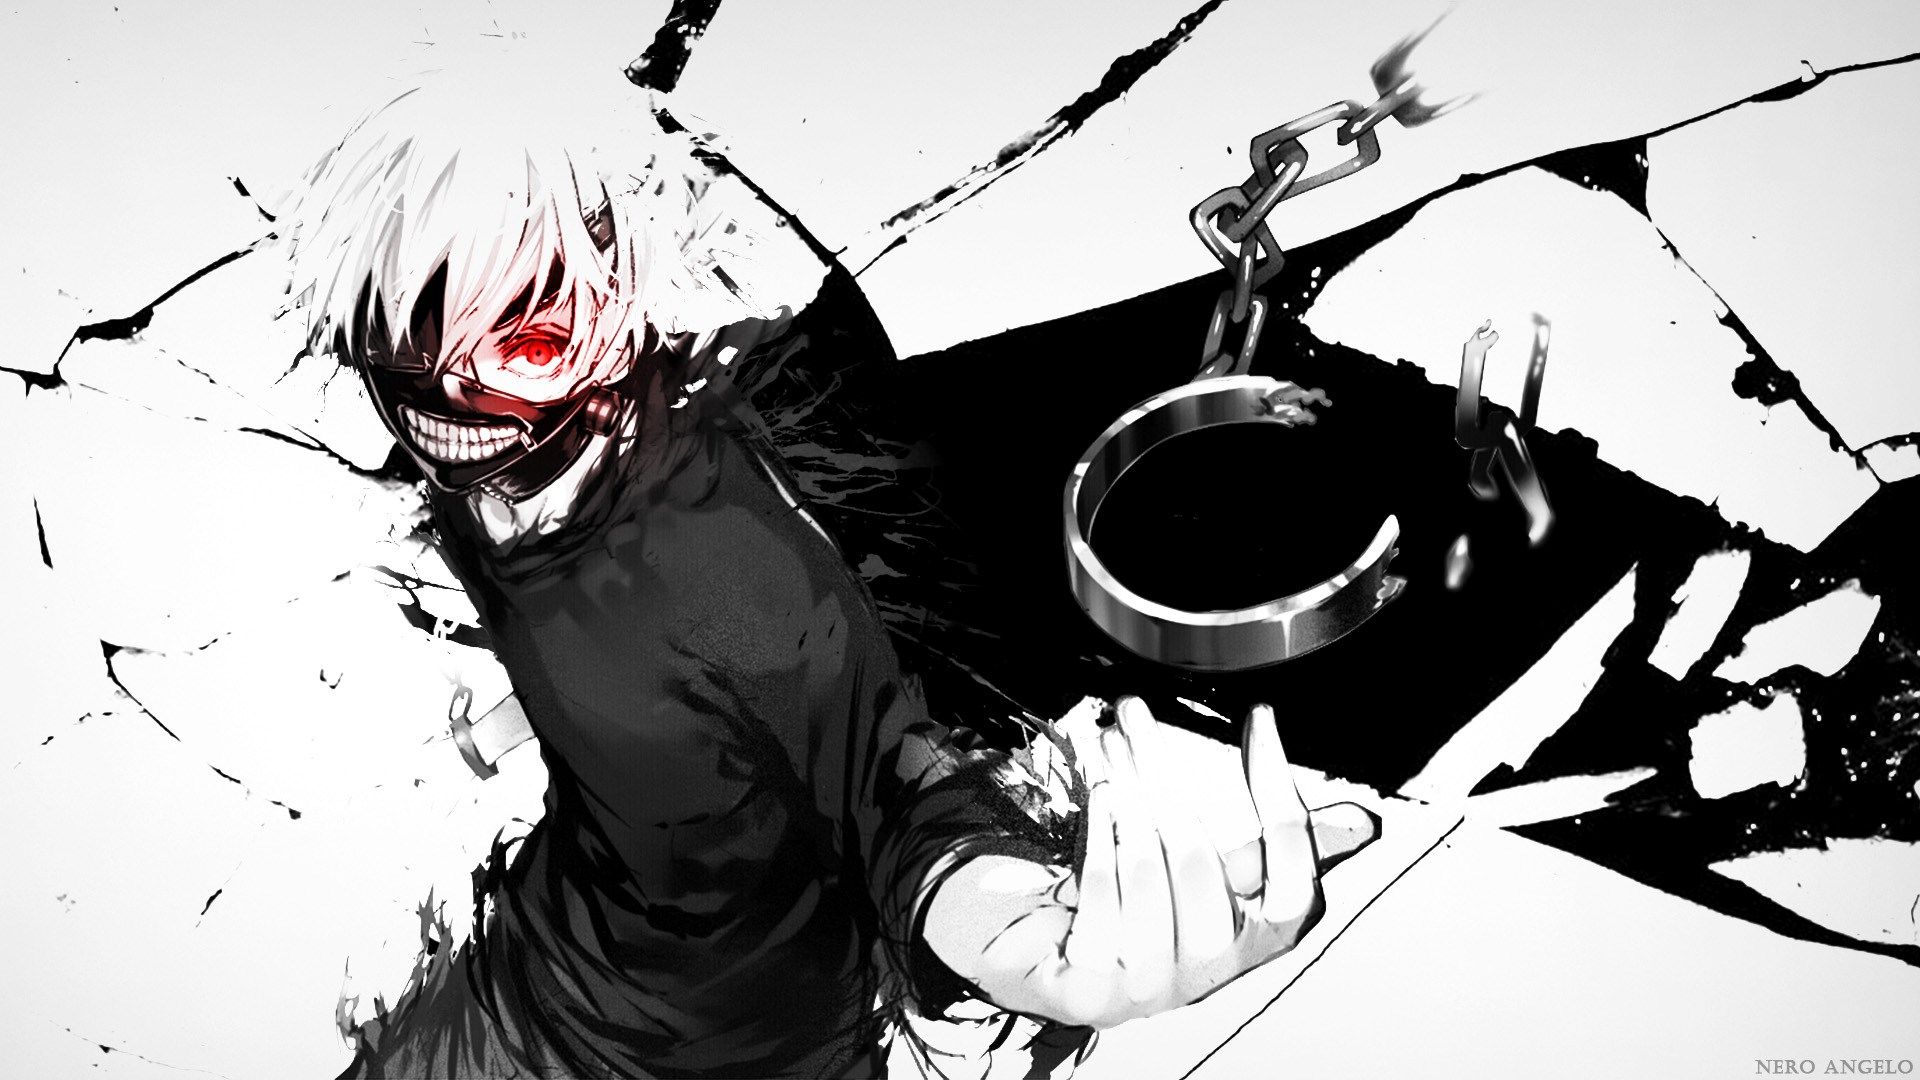 Cool Tokyo Ghoul Wallpaper Gif For Phone - 1920x1080 Wallpaper 